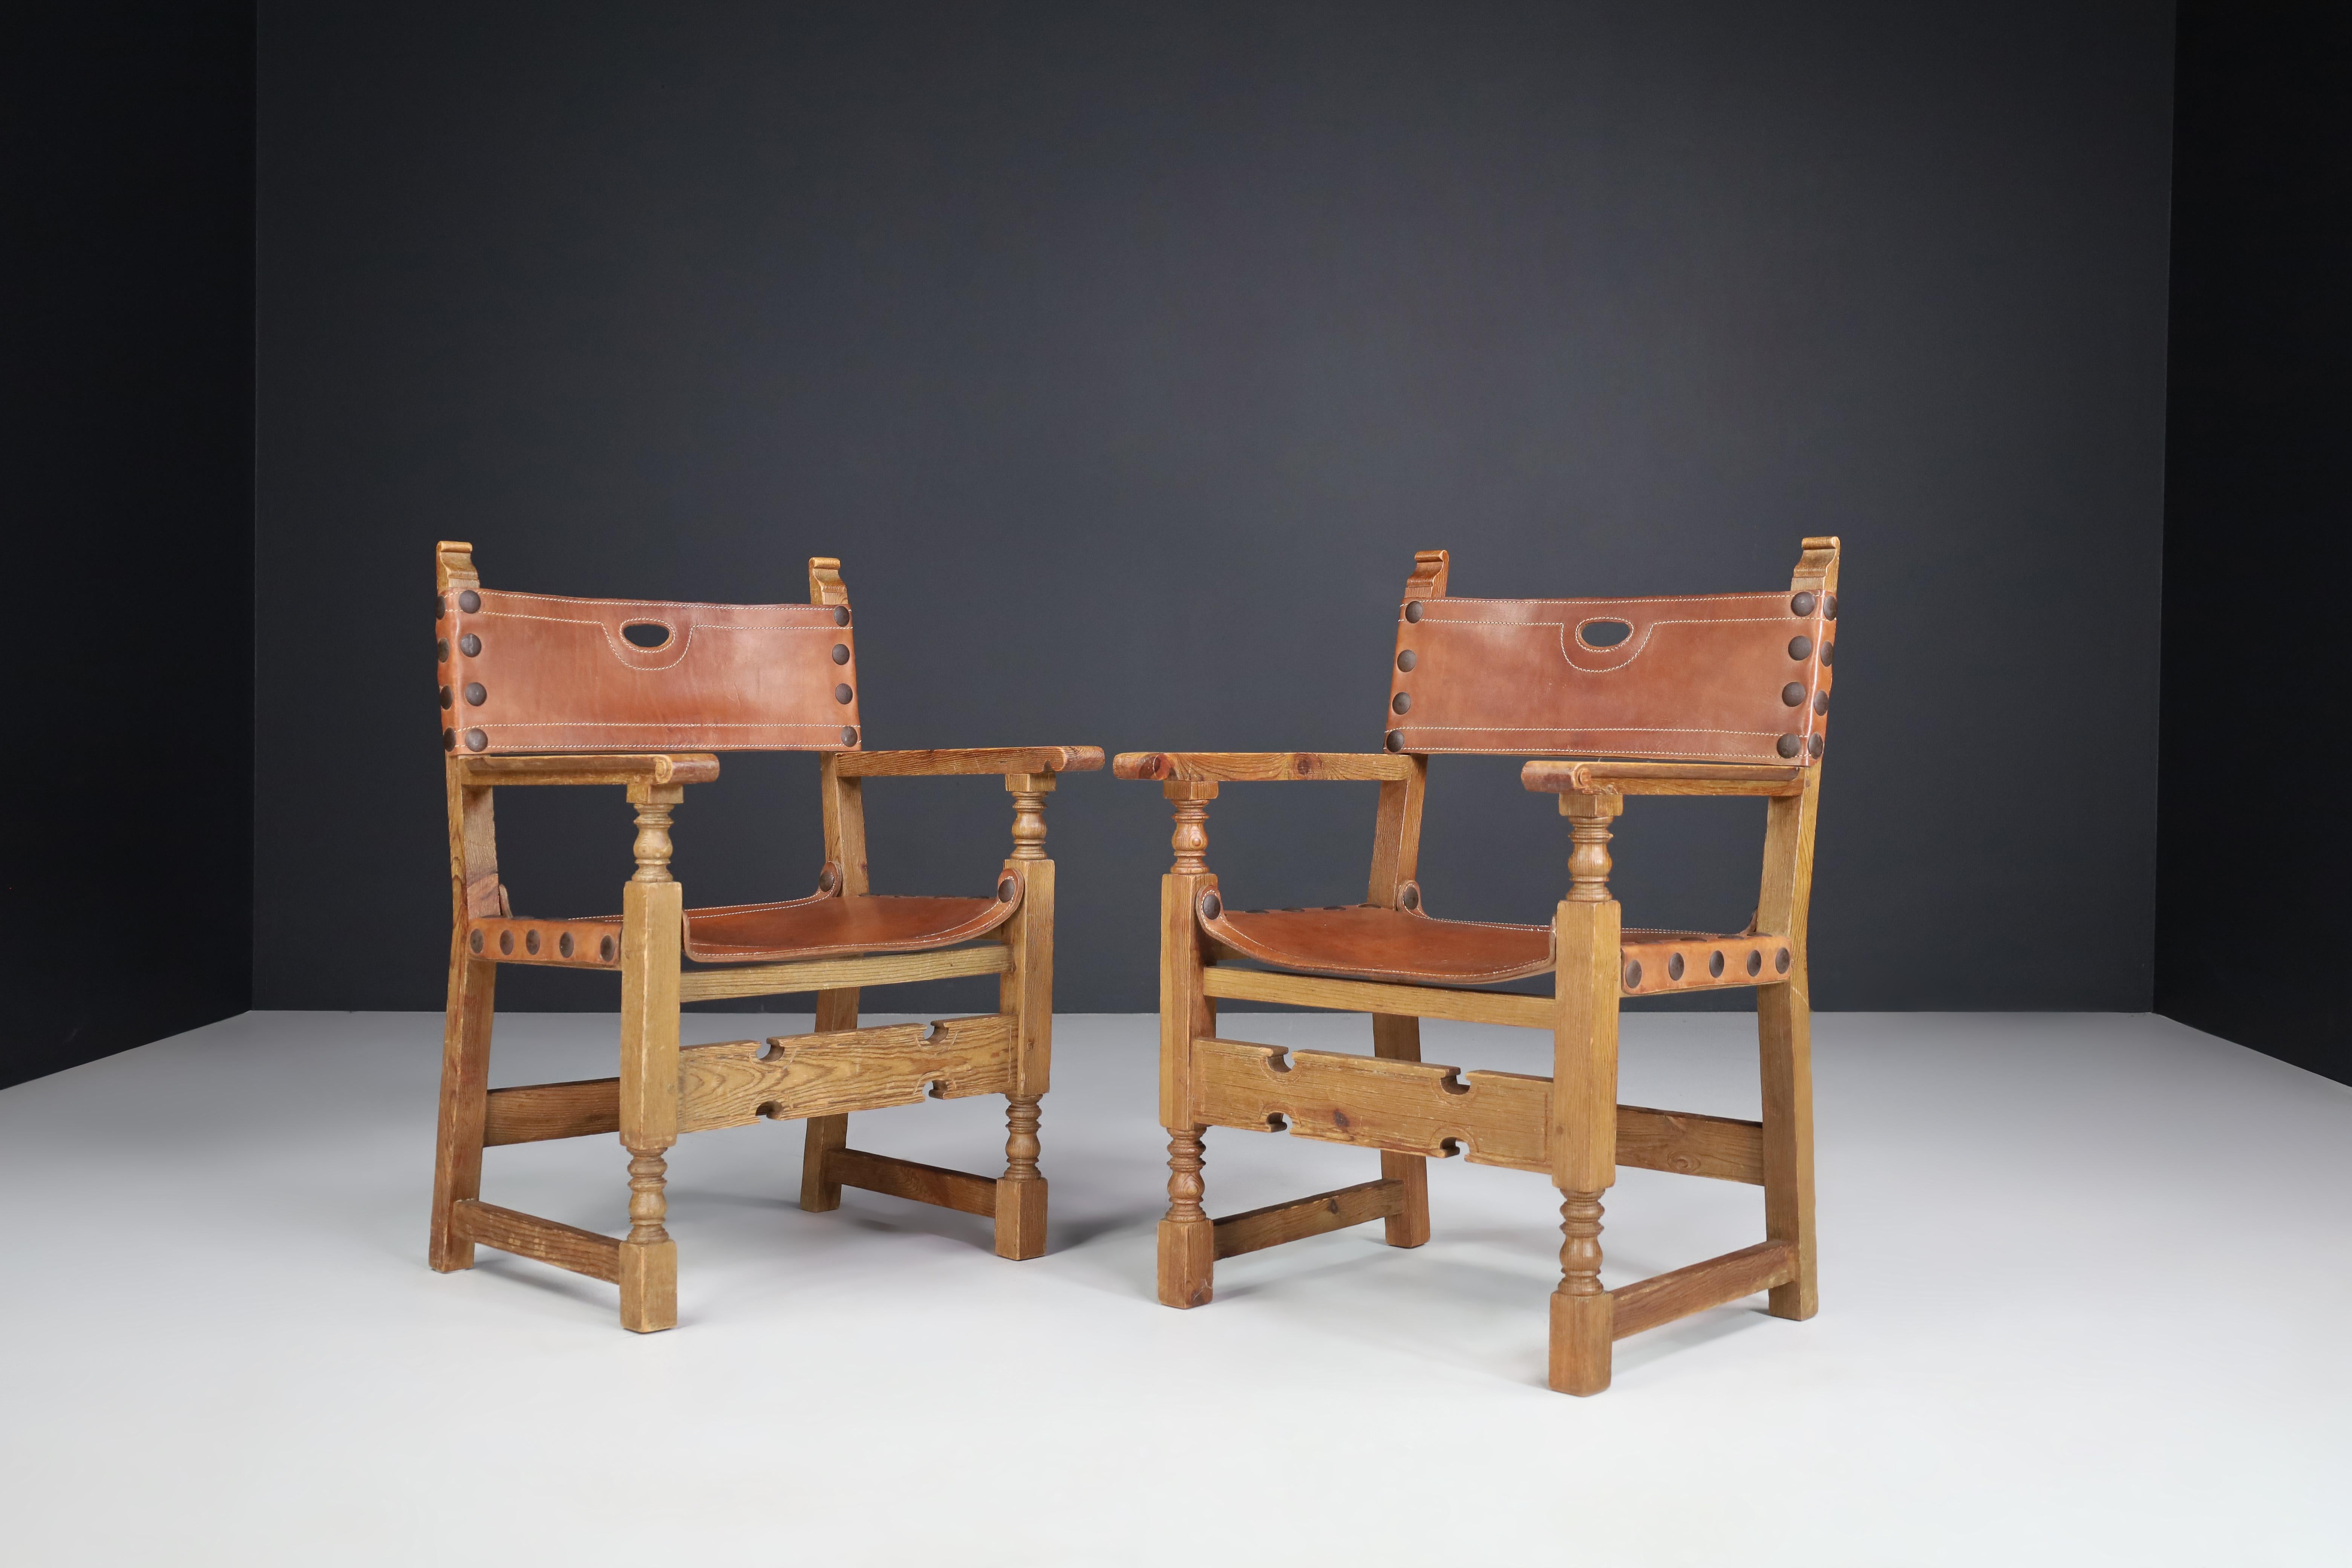 Pine and saddle leather arm chairs, France 1940s.

A striking pair of French armchairs in pinewood dating from the 1940s with original saddle leather seats, backrest, and large domed metal studs. Standing on rectangular legs joined by a broad